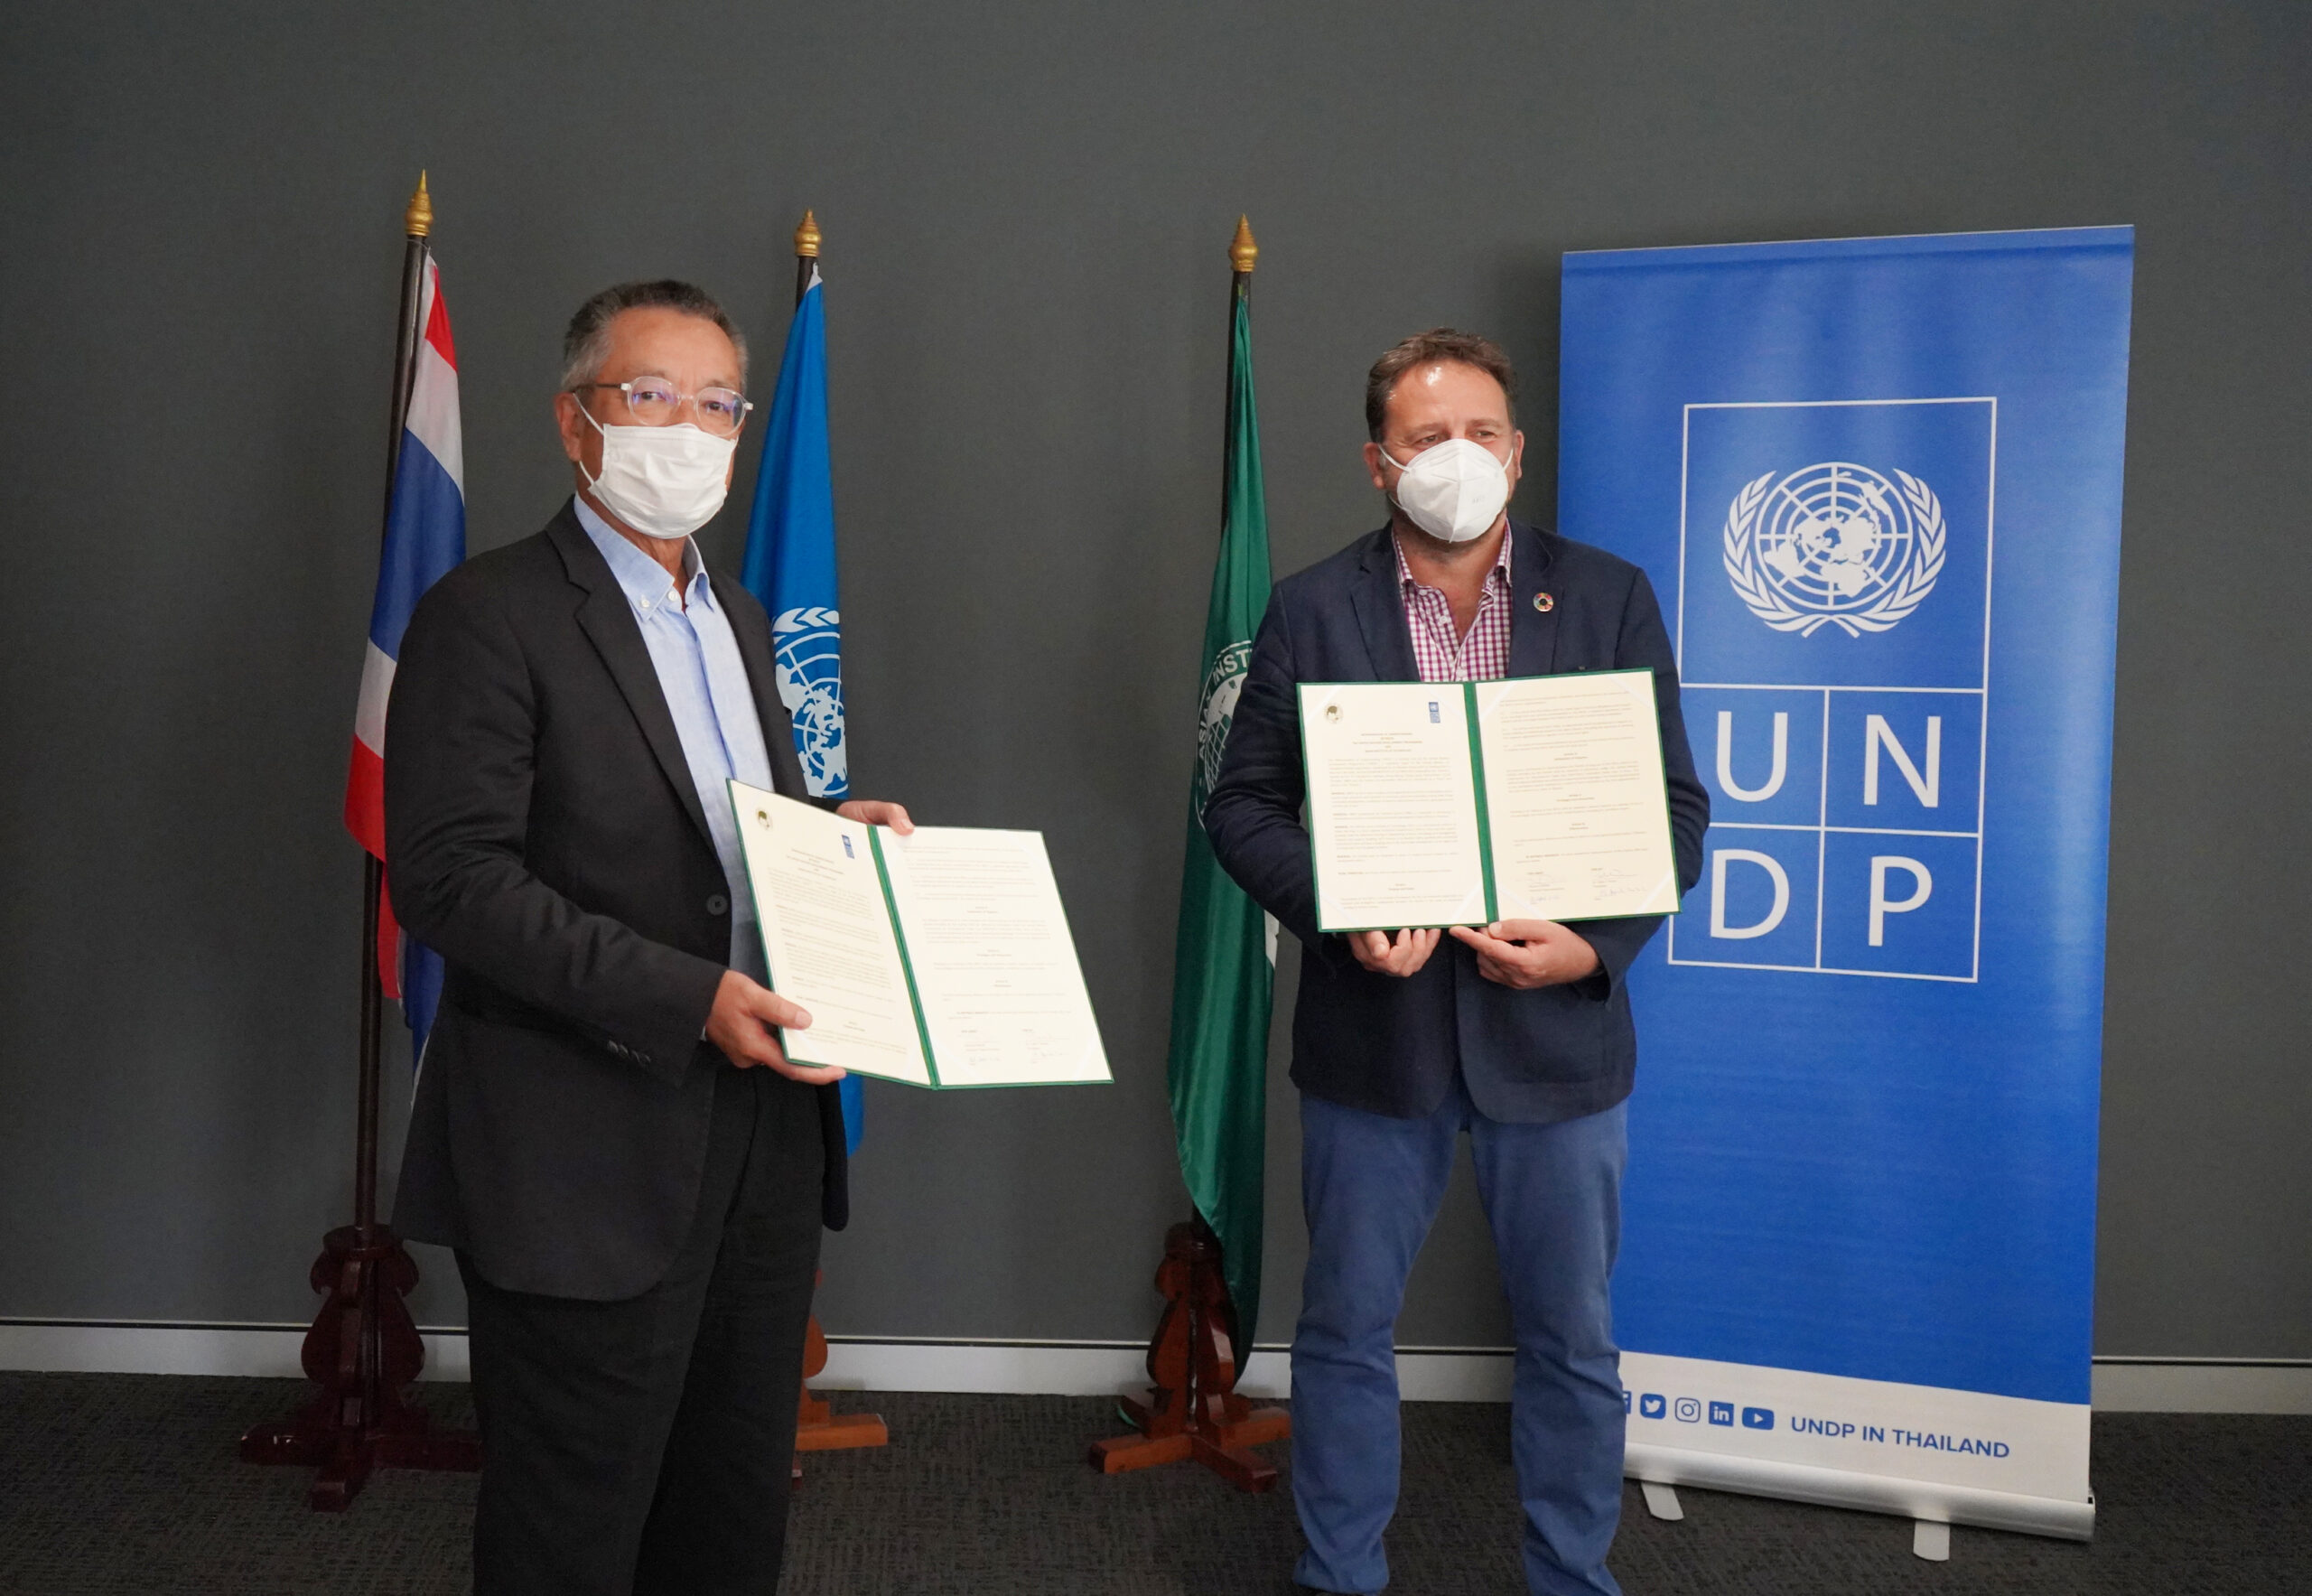 UNDP and AIT join hands to Promote Research on Sustainable Development Goals